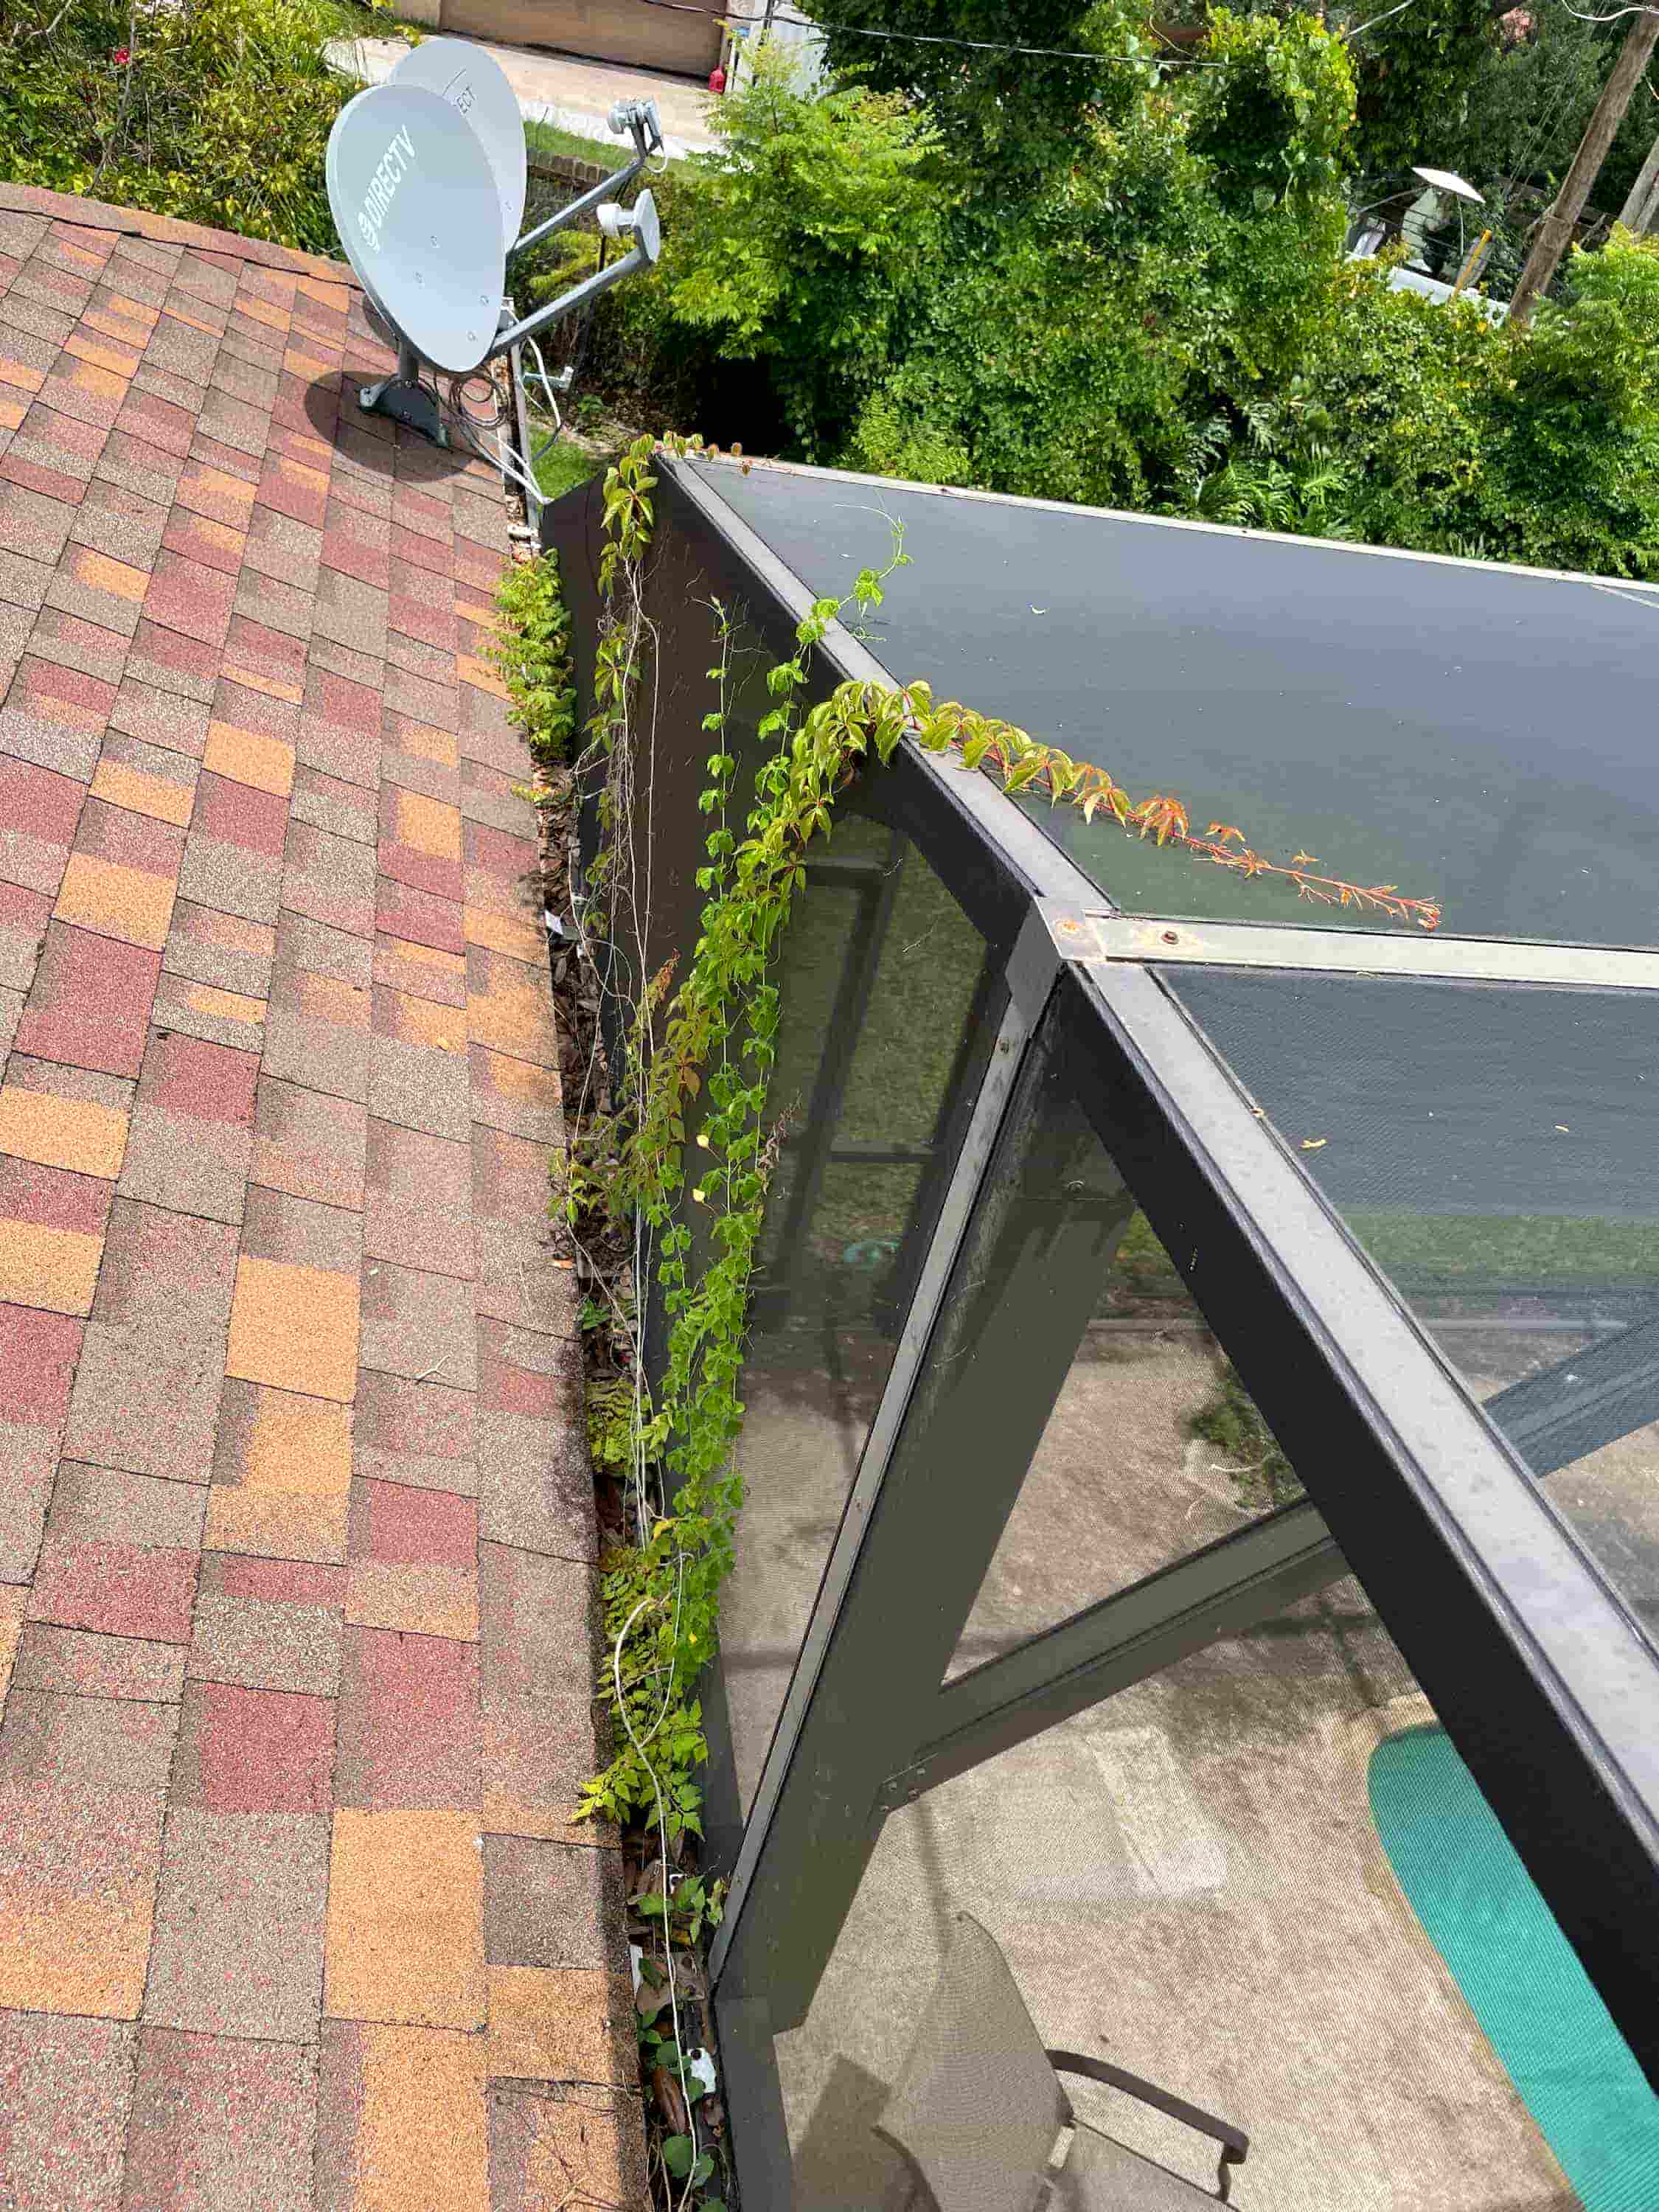 ways to unclog gutter downspout